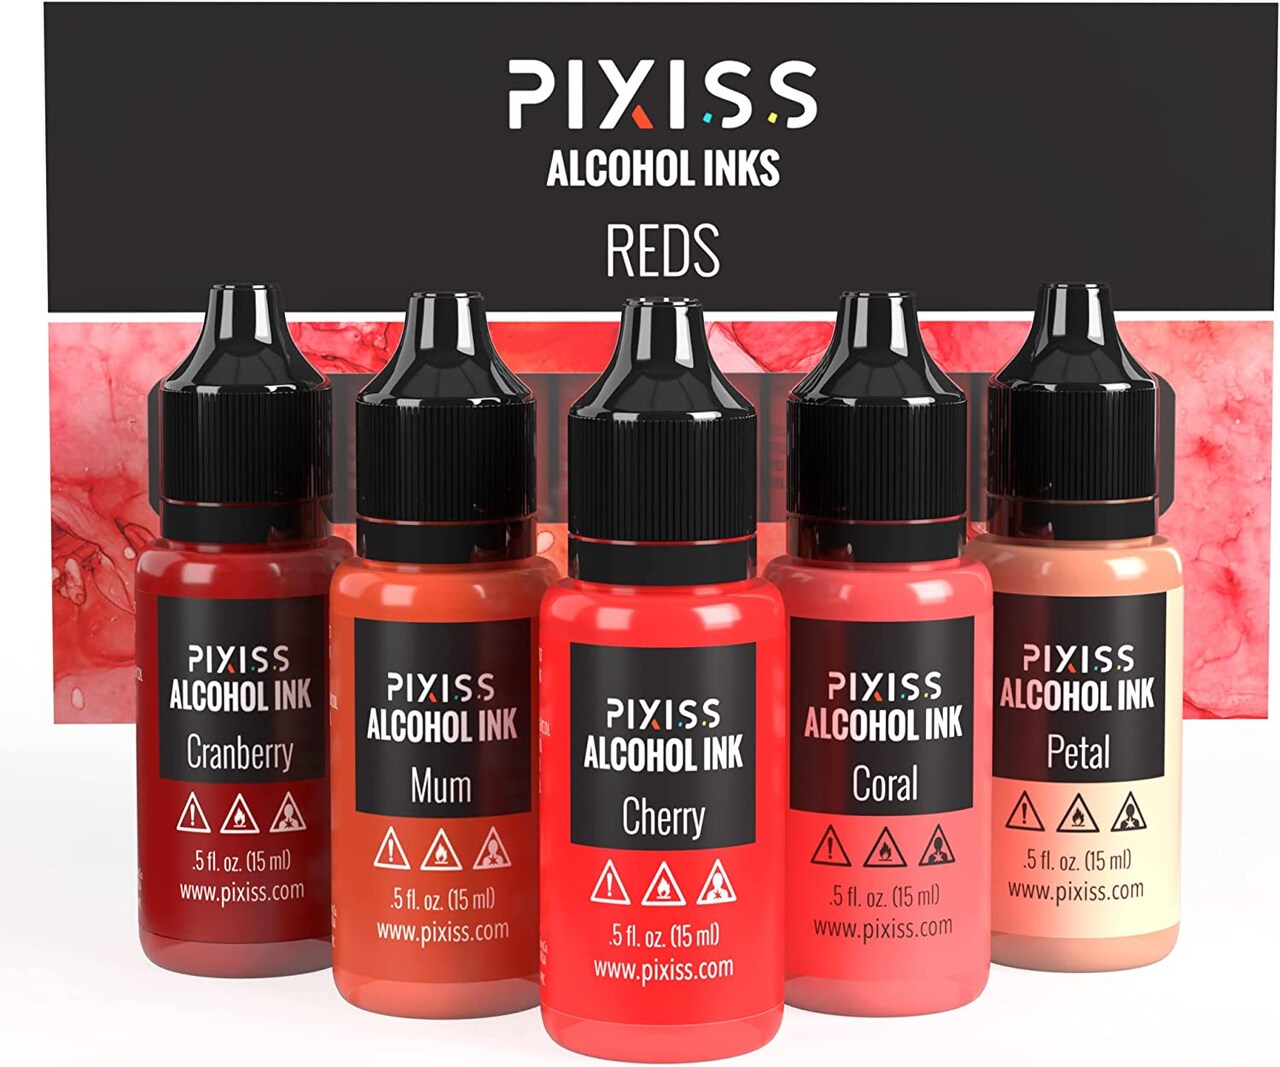 Pixiss Reds Alcohol Inks Set, 5 Highly Saturated Red Alcohol Inks for Resin